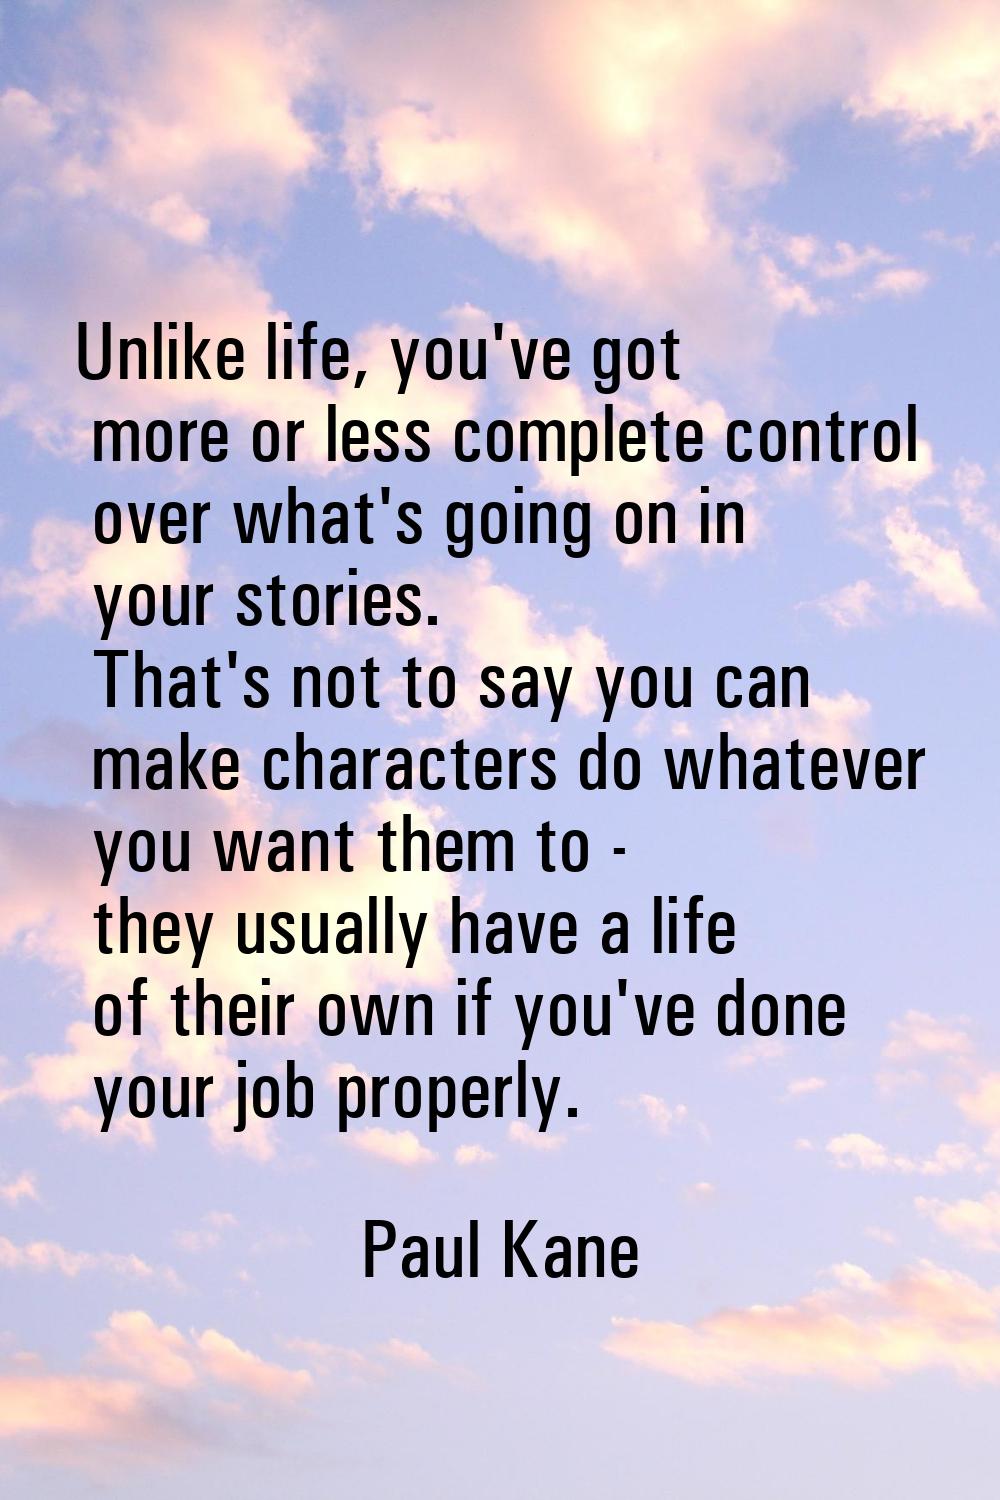 Unlike life, you've got more or less complete control over what's going on in your stories. That's 